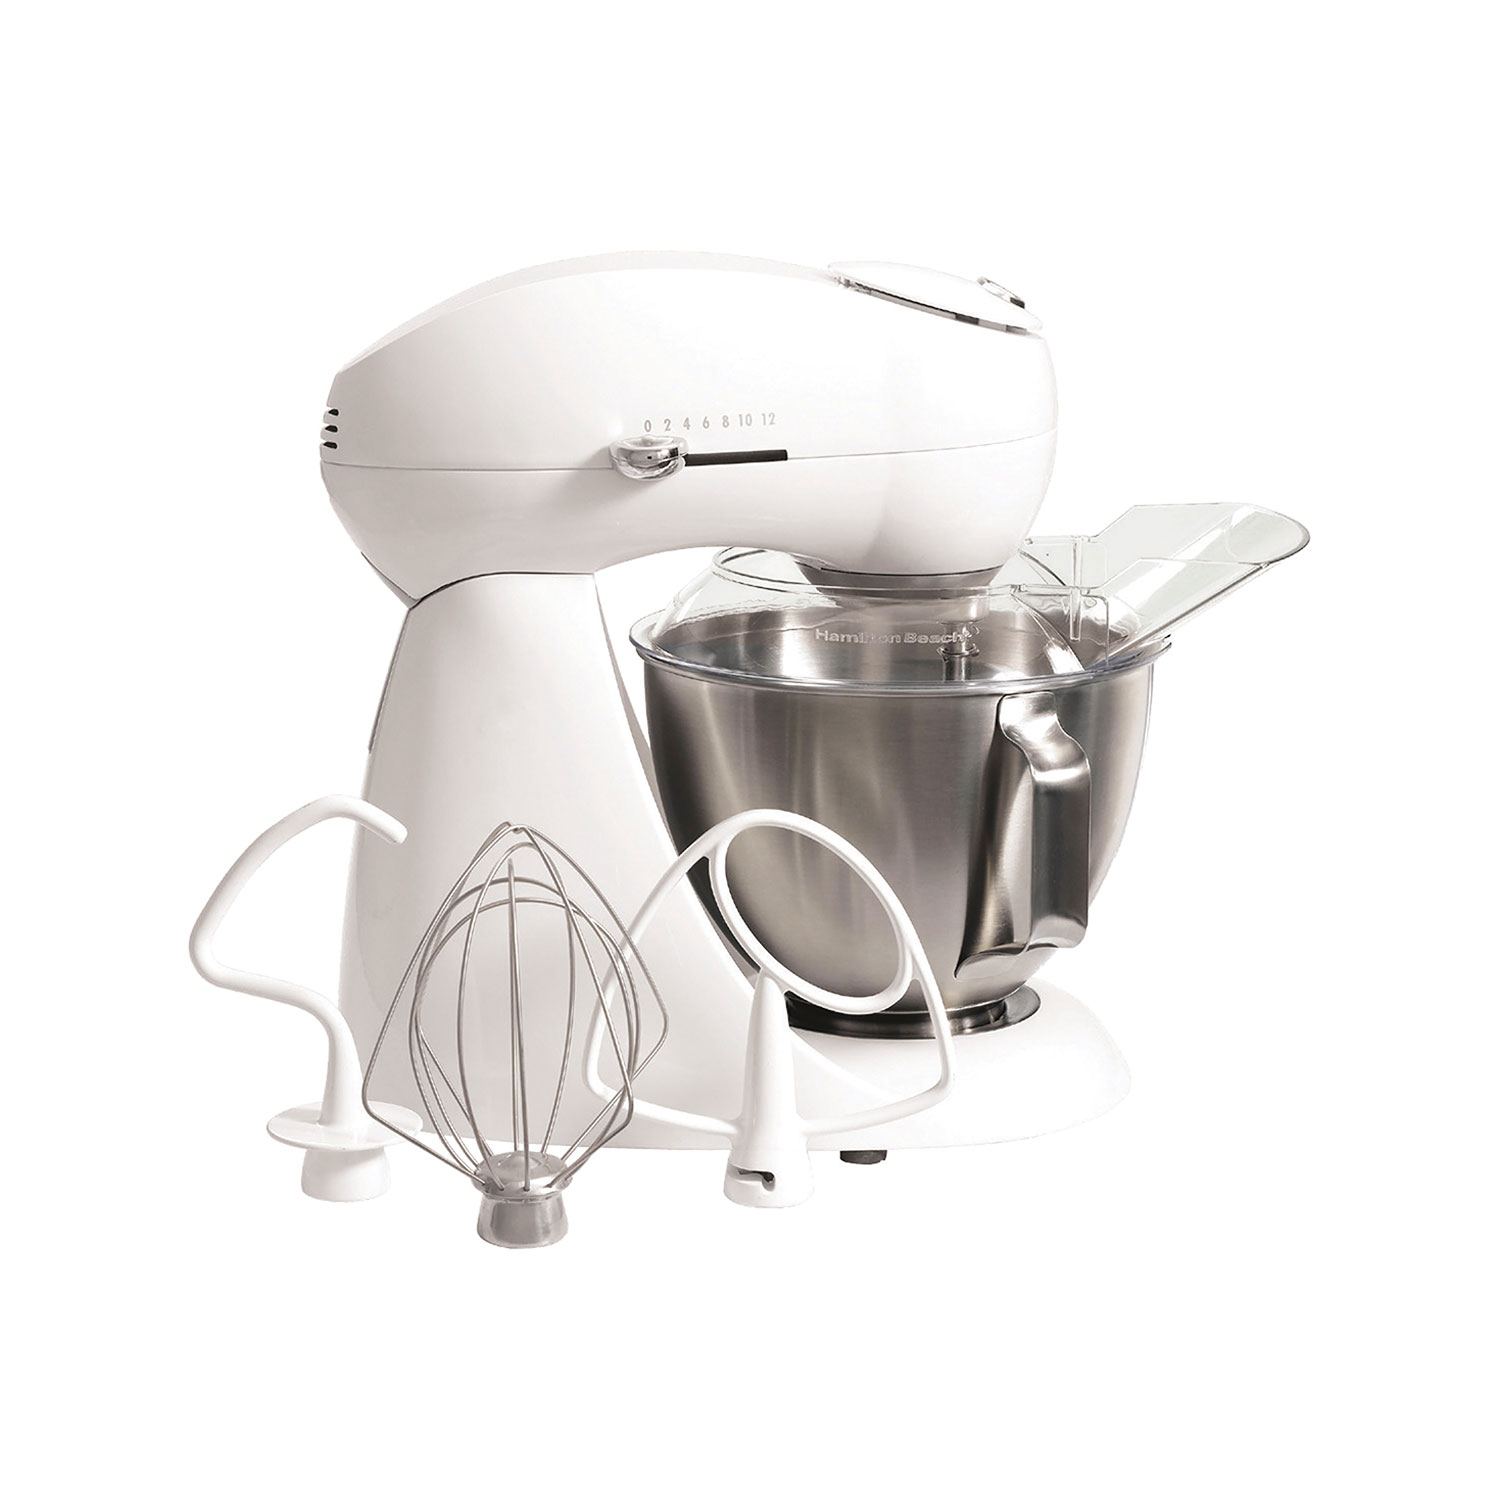 Eclectrics® Sugar (White) All-Metal Stand Mixer (63221)